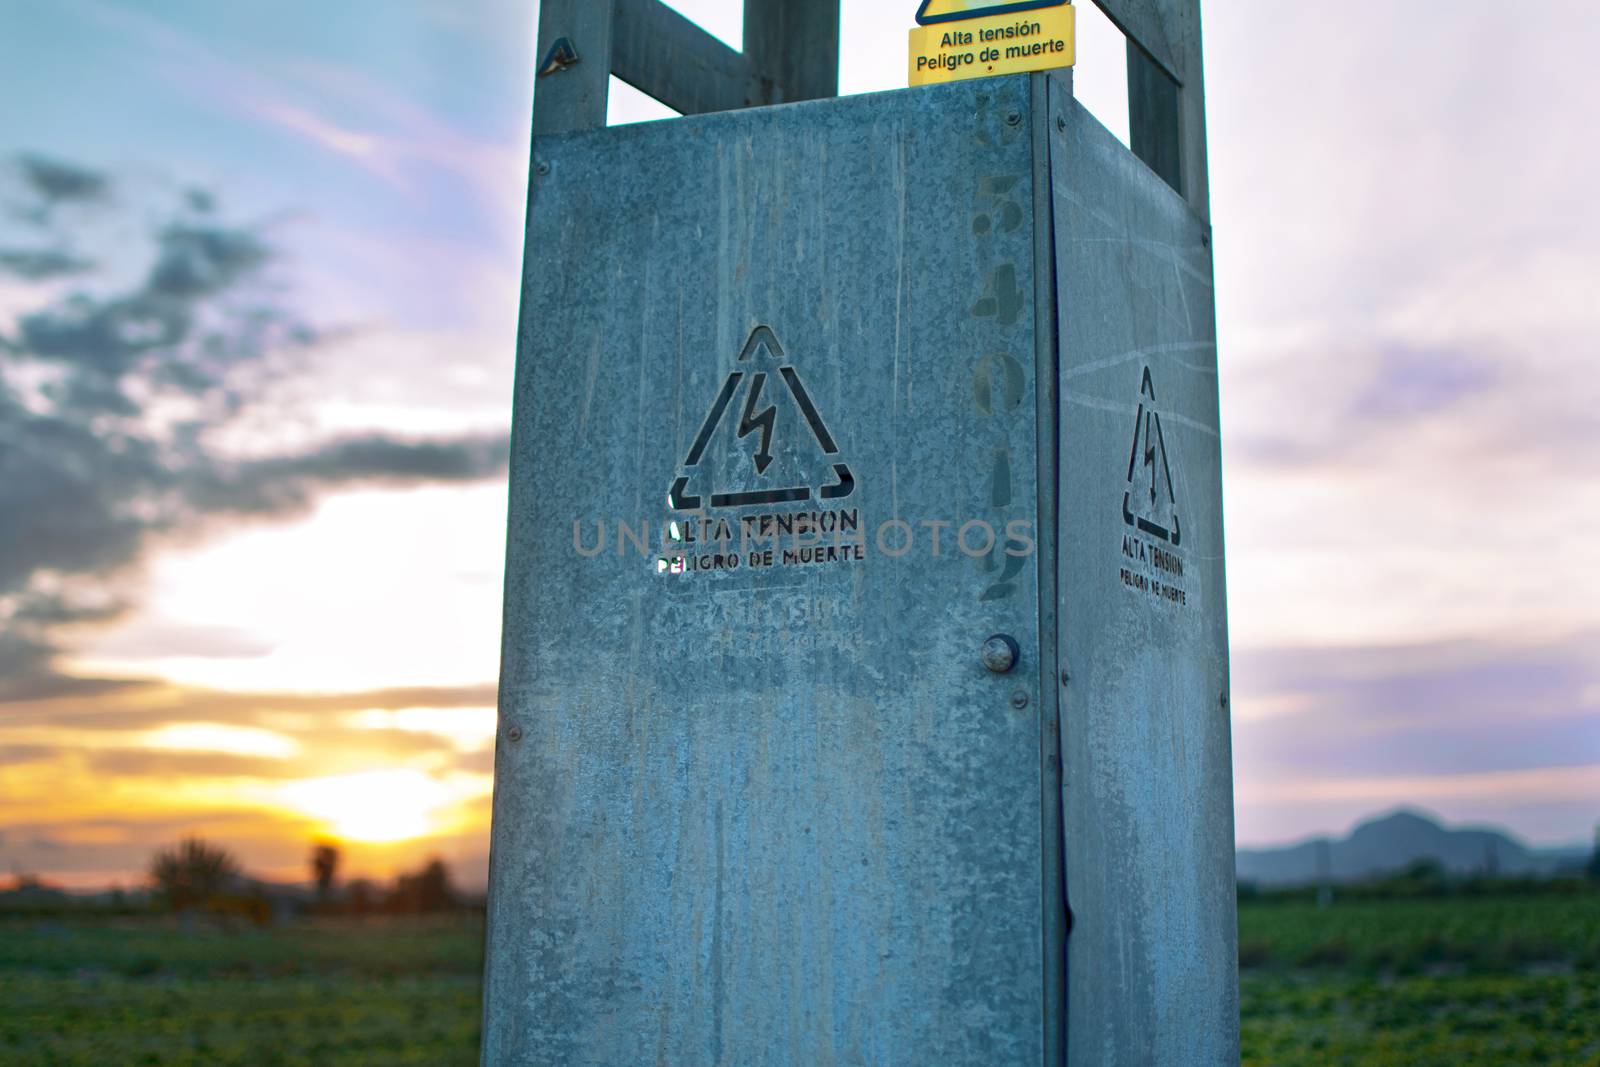 High voltate sign in the base of an electric tower at sunset. Cell tower, electricity, cables. Written high voltate, death danger in the text